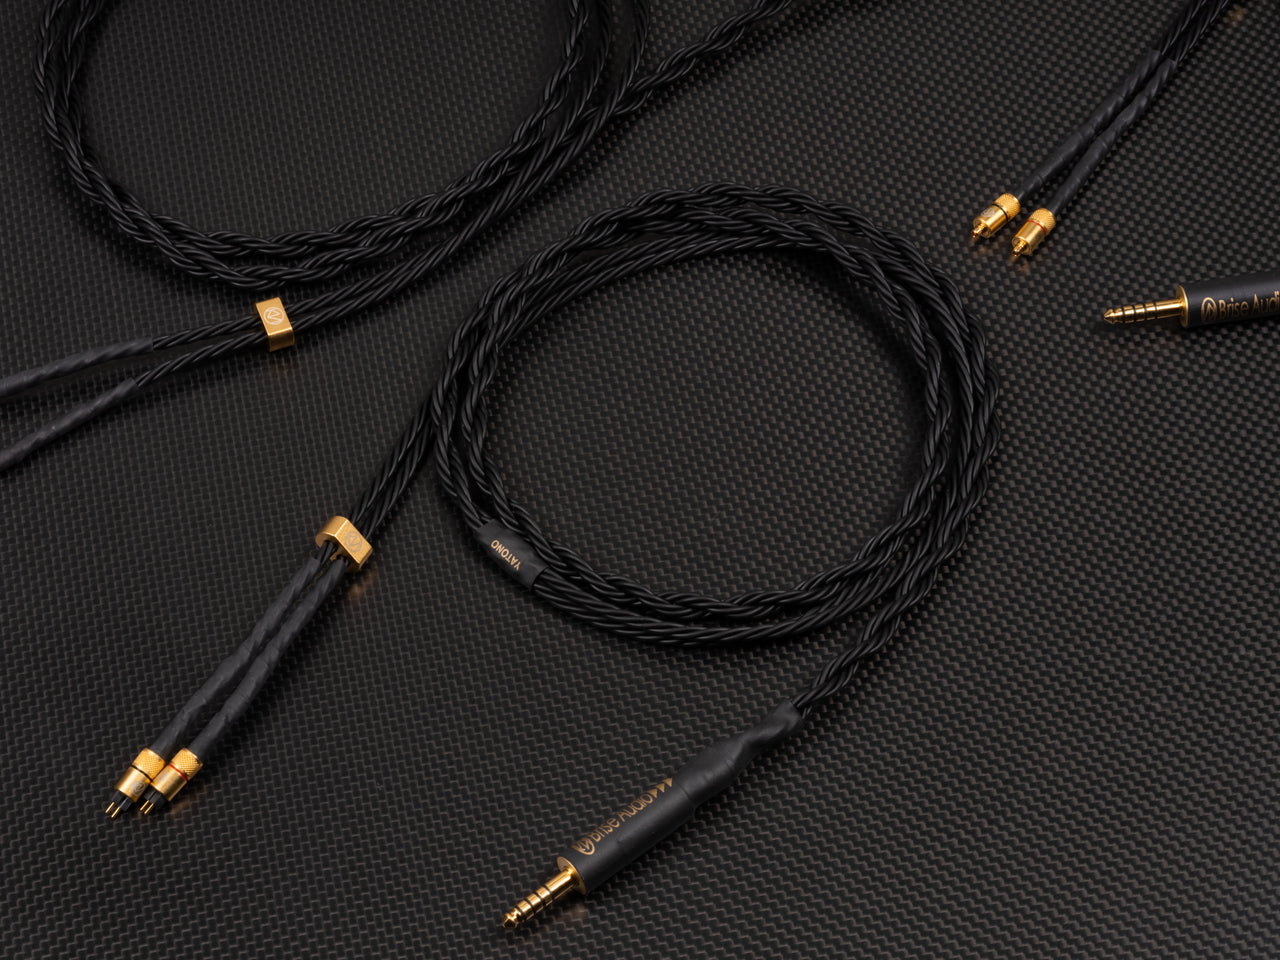 On August 20, 2021, BriseAudio will release YATONO 8wire-Ultimate, an earphone re-cable with a full swing to sound quality.